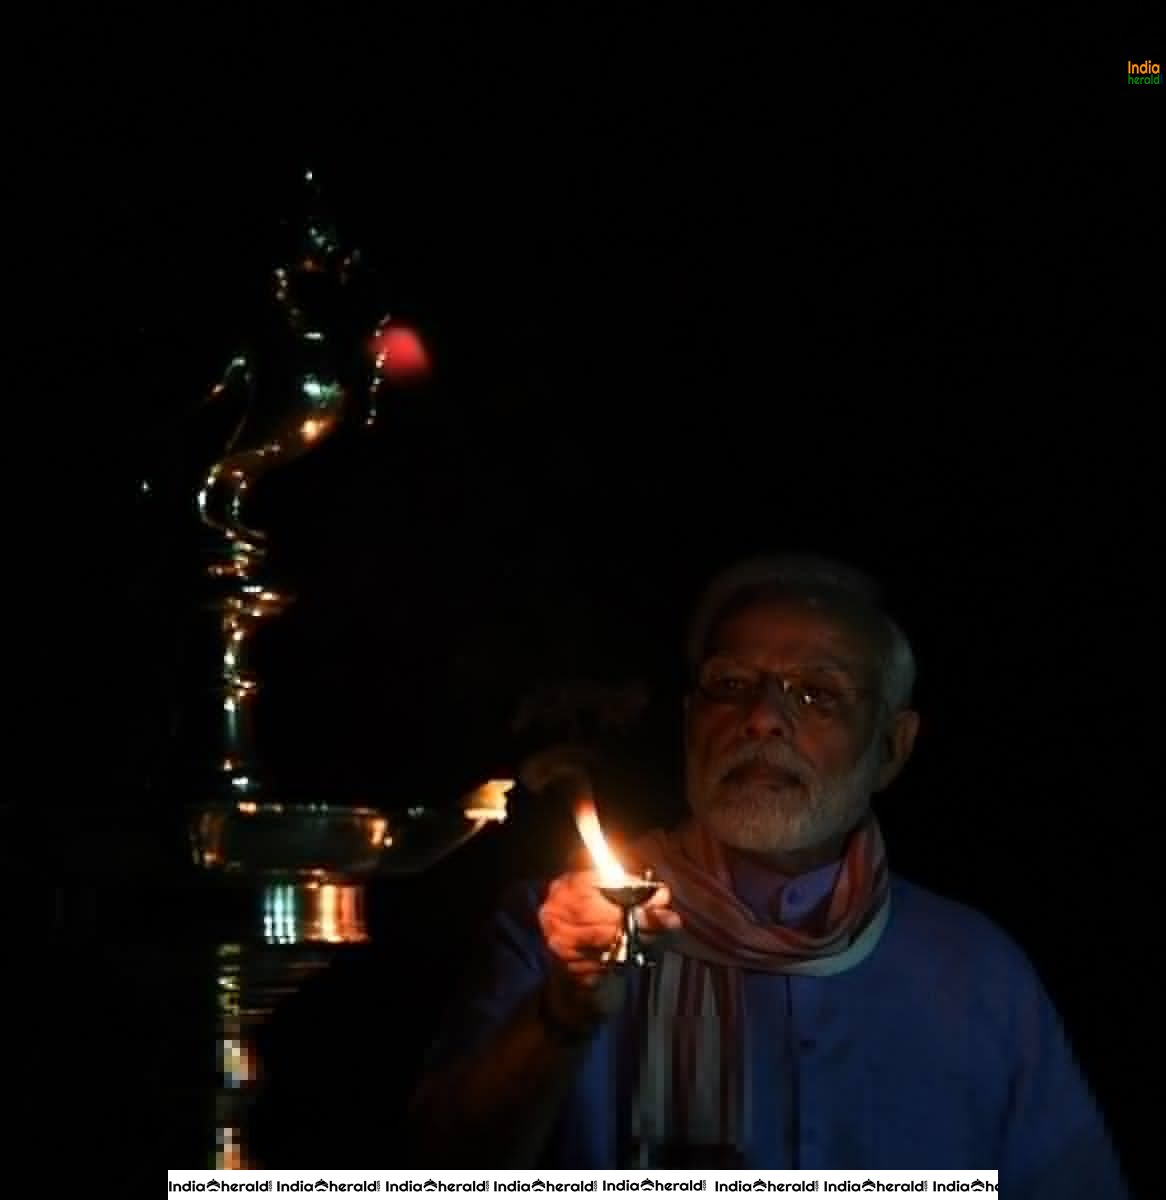 PM Modi lights a lamp after turning off all lights at his residence to mark India fighting against Corona Virus